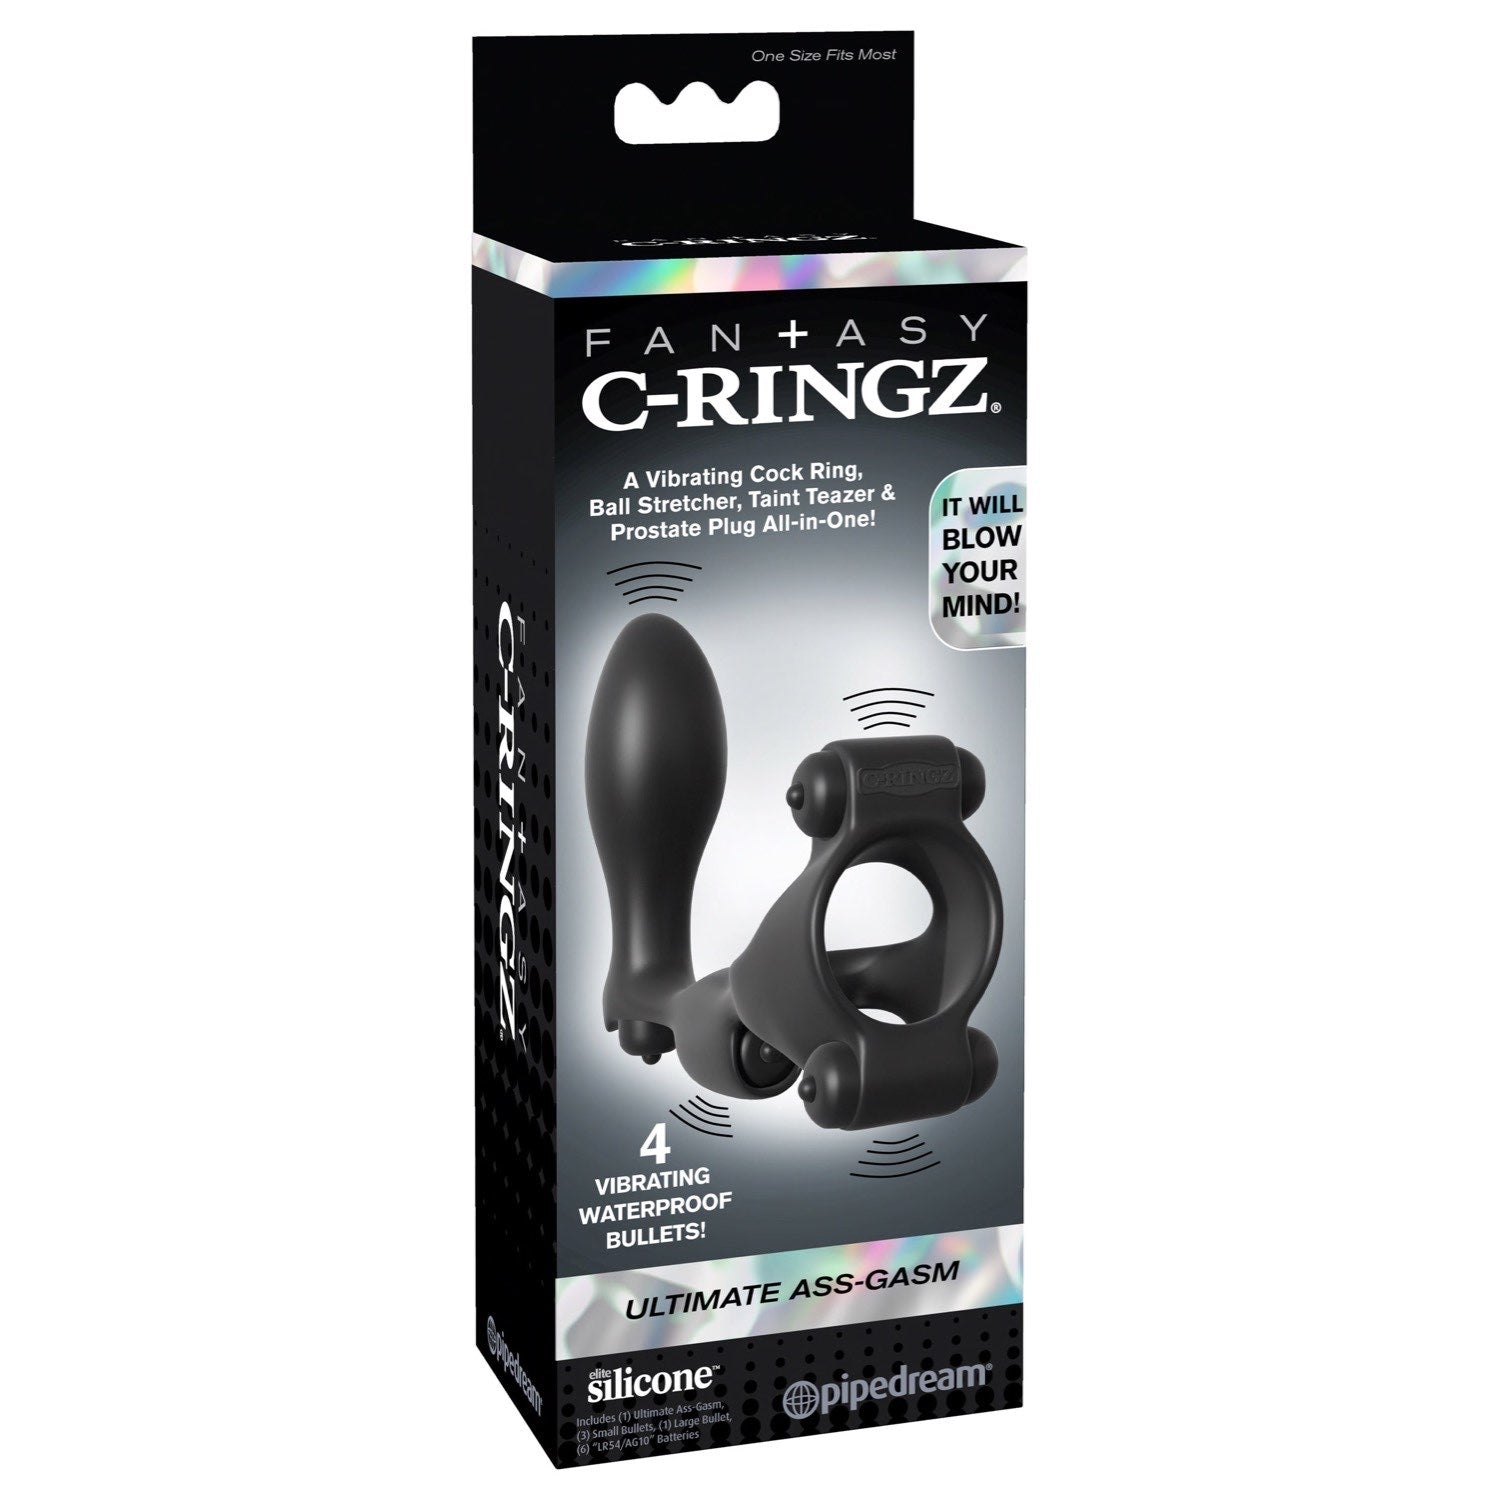 Fantasy C-Ringz Fantasy C-ringz Ultimate Ass-gasm - Black Quadruple Vibrating Cock &amp; Ball Rings with Anal Plug by Pipedream